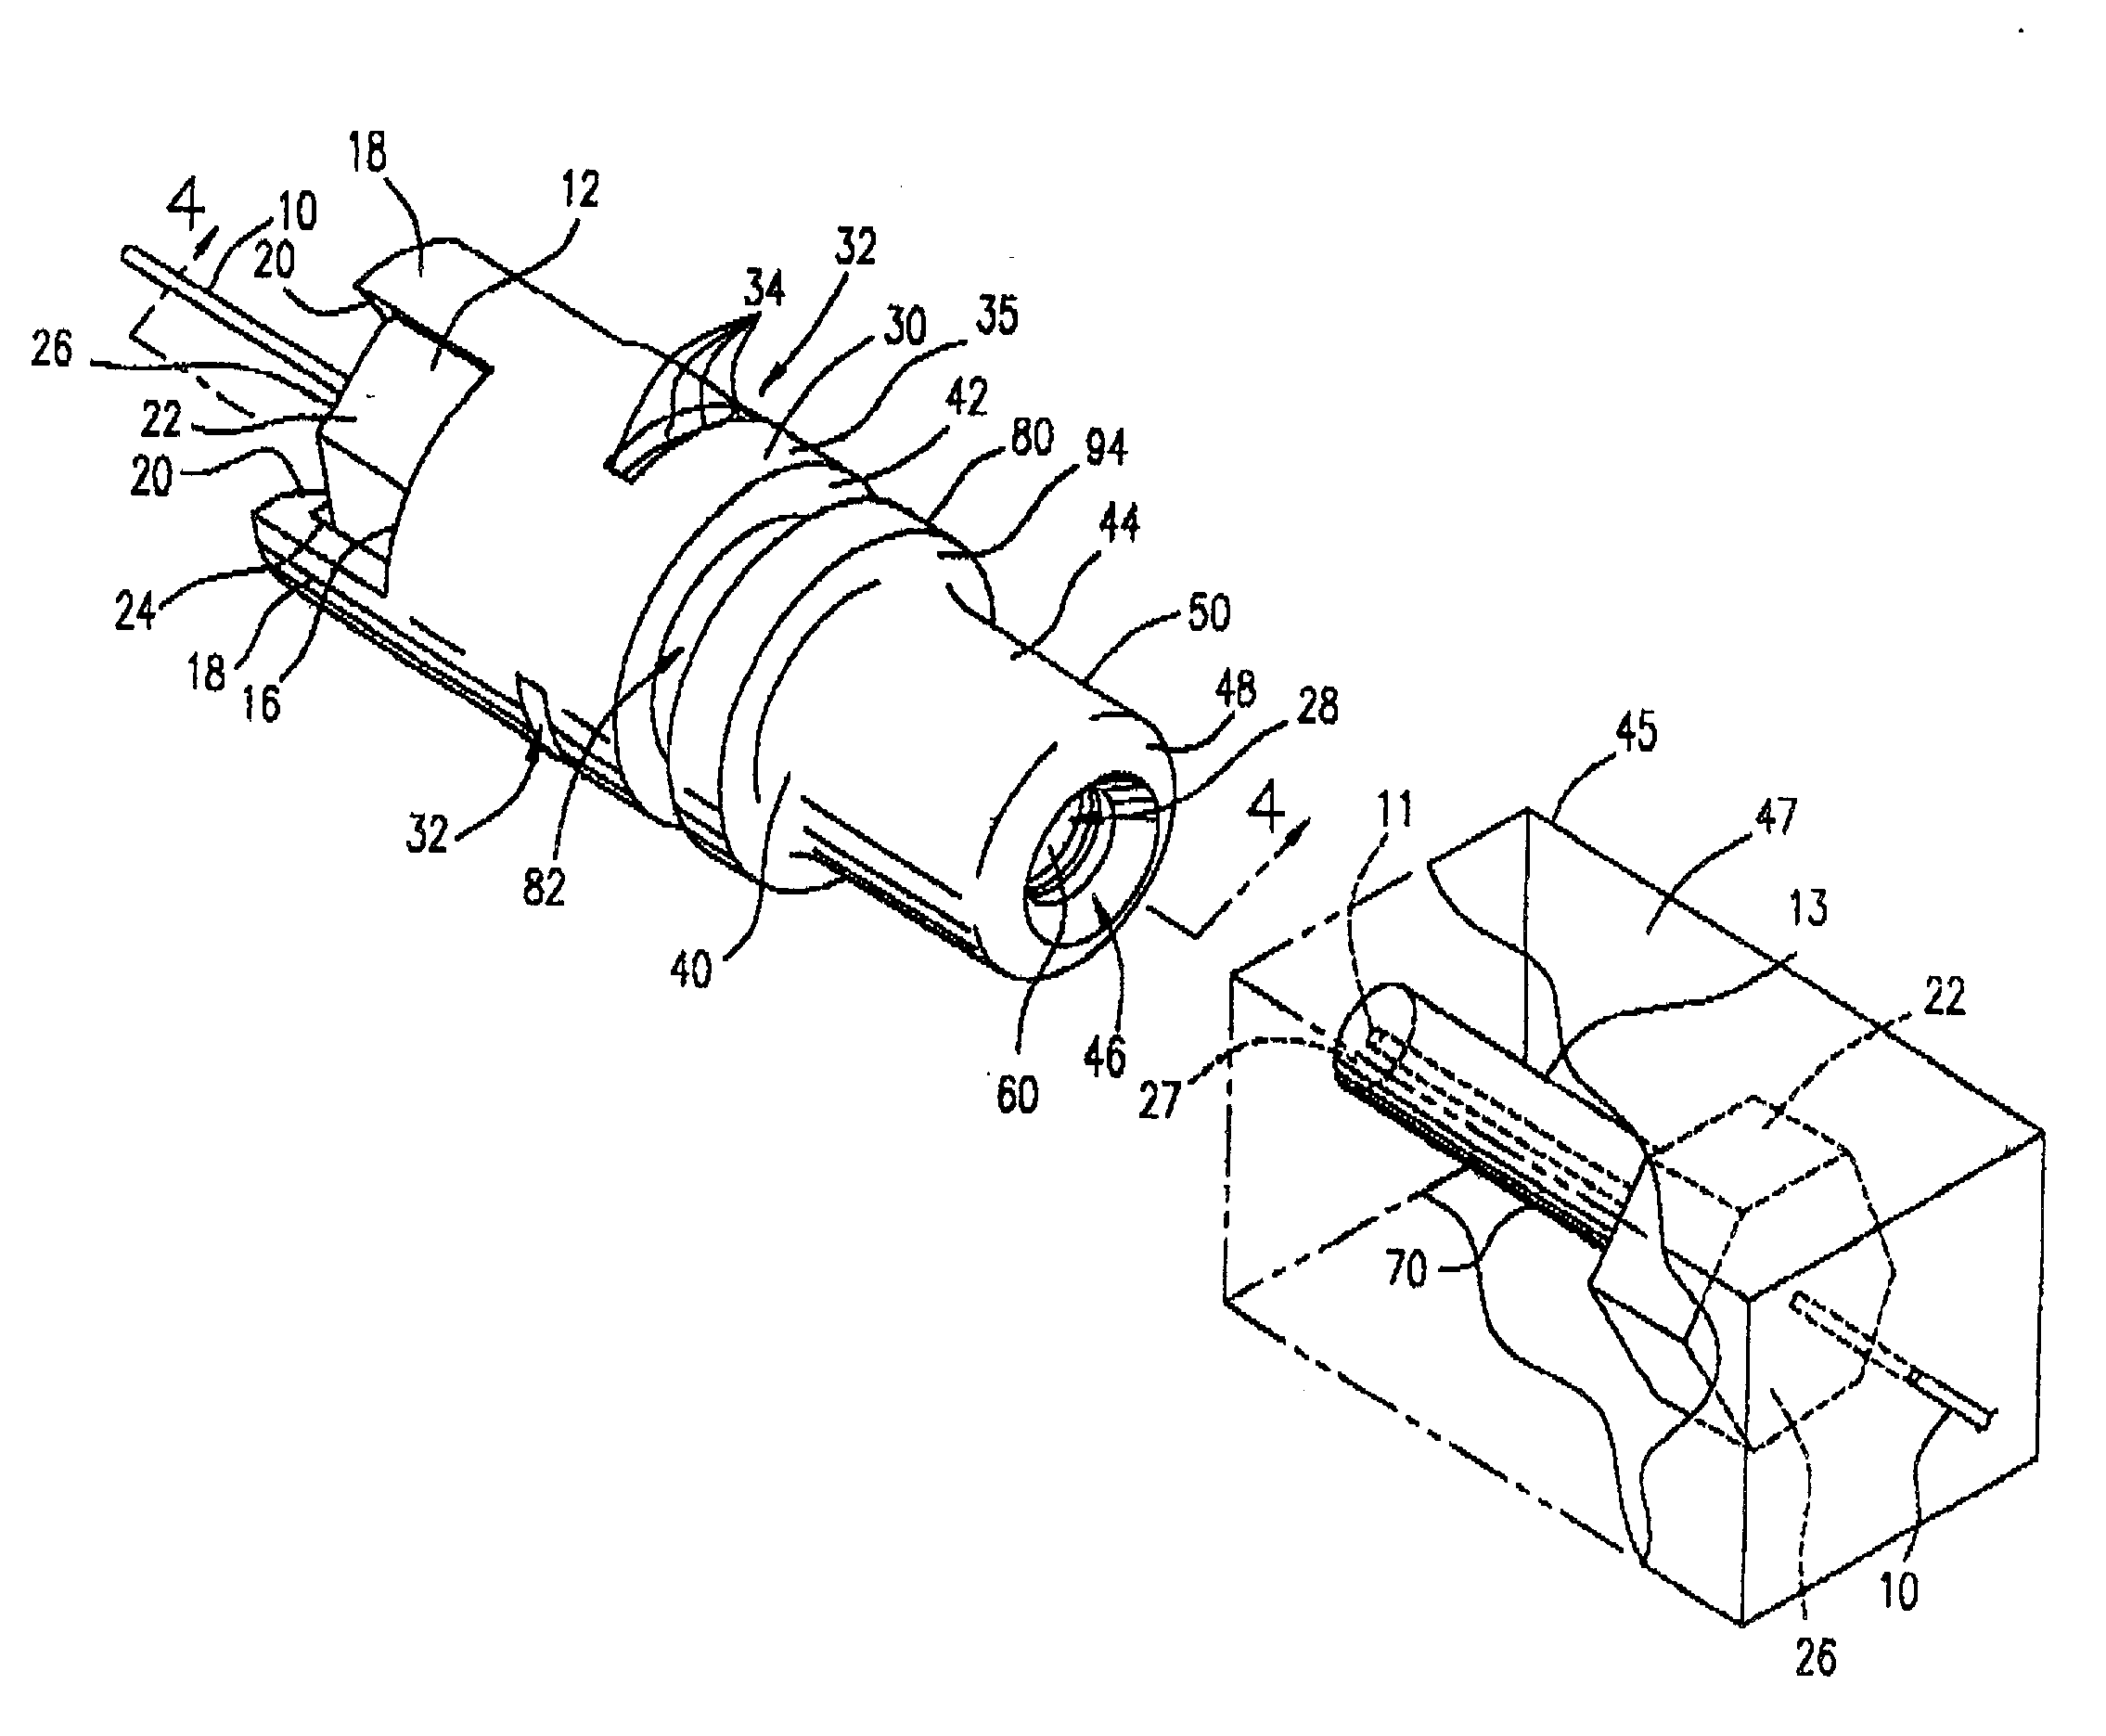 Optical fiber coupler and an optical fiber coupler incorporated within a transceiver module